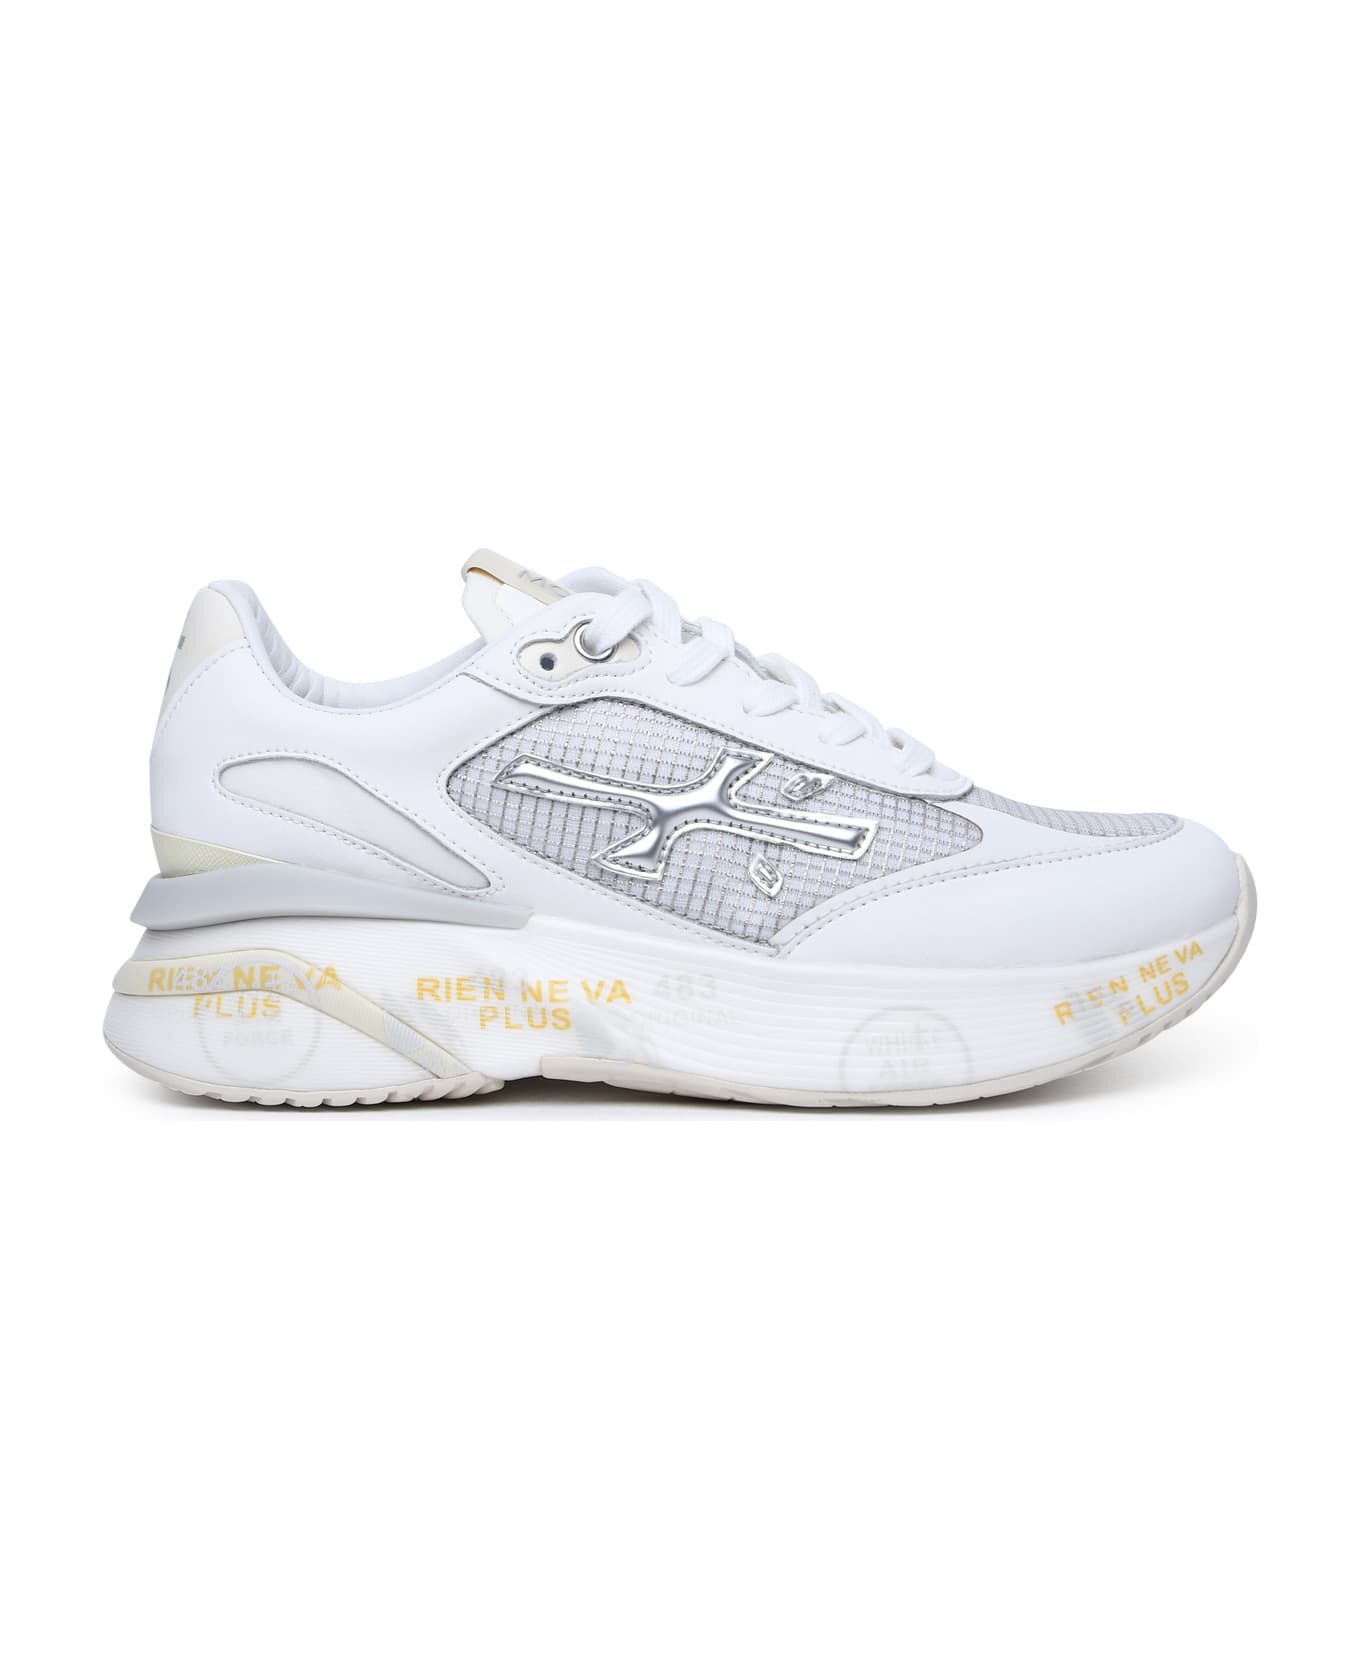 Premiata 'moerund' Sneakers In Leather And White Fabric スニーカー